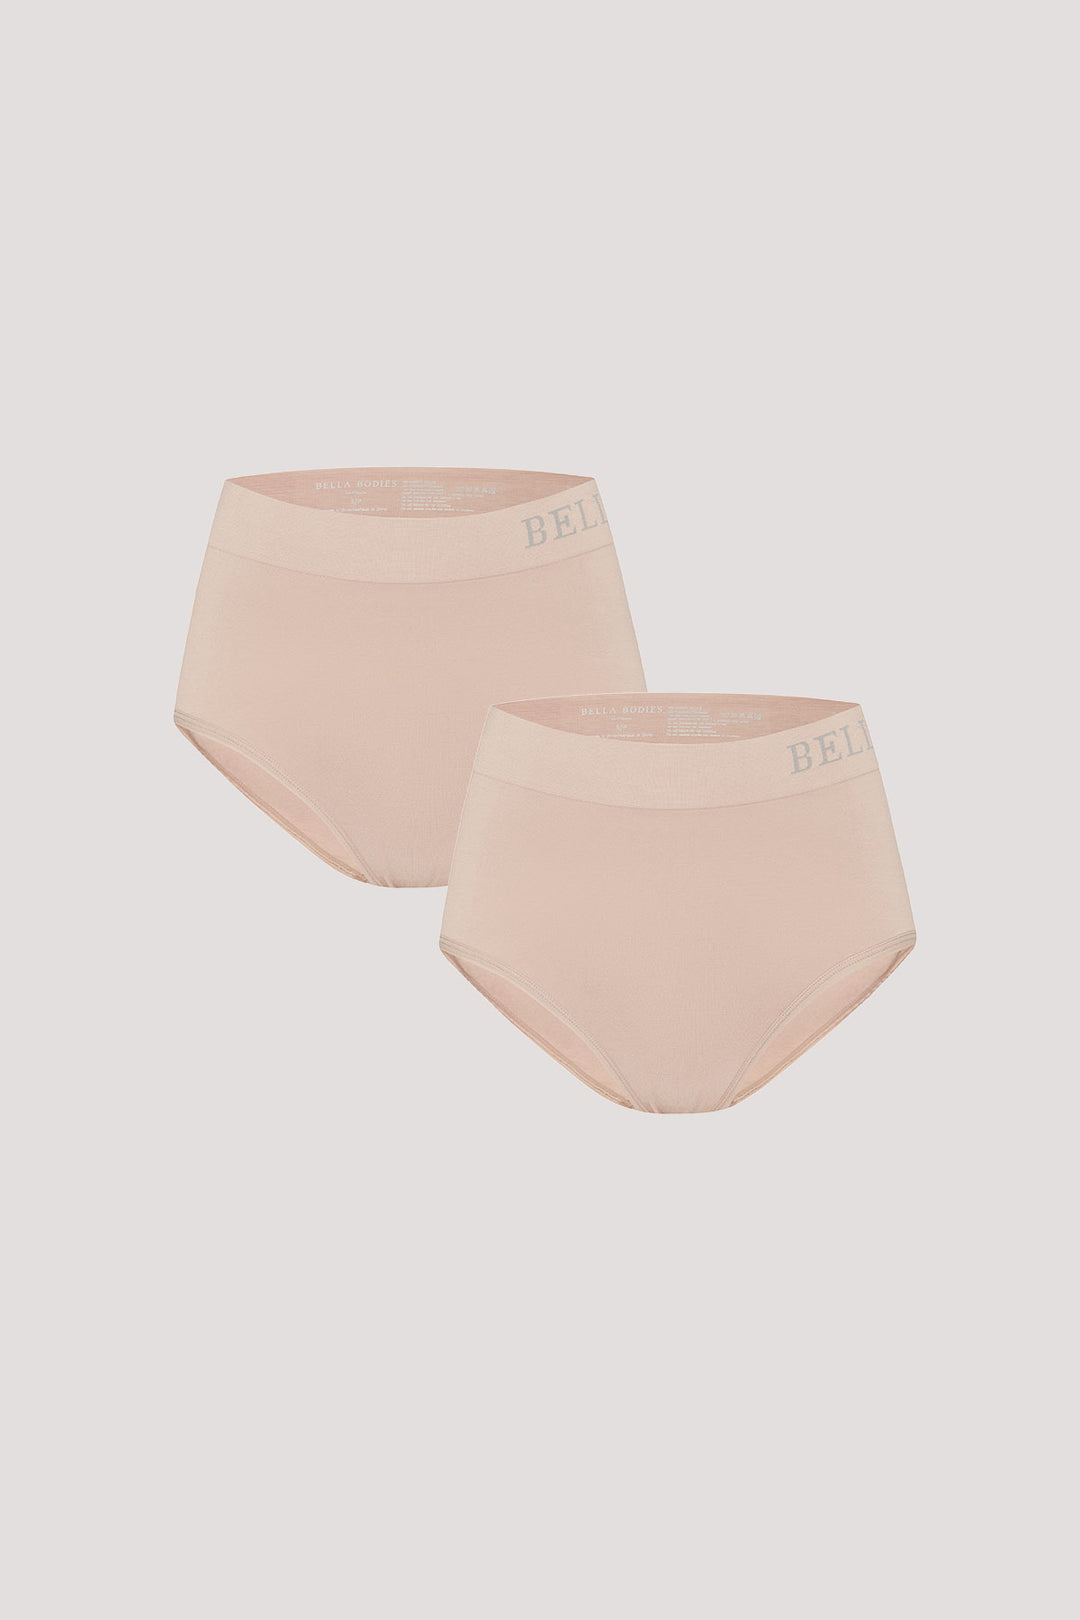 Eco-friendly High Waist Breathable Bamboo Underwear | Double pack | Bella Bodies UK | Sand and Sand